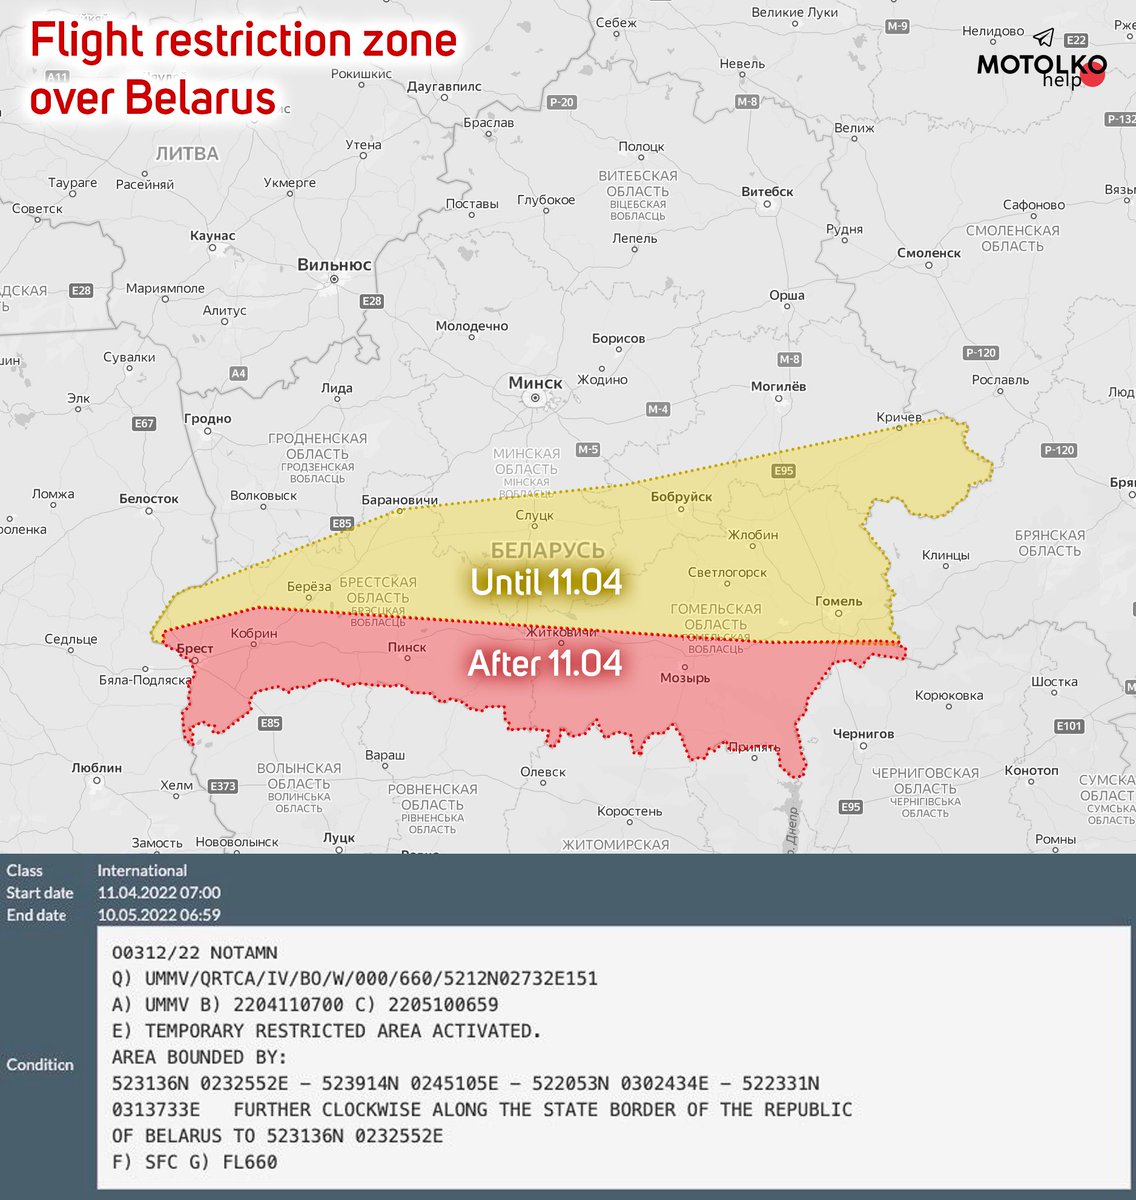 Flight restriction zone over Belarus was extended until May 10.  The restricted zone for flights of all types of civil aircraft (including UAV) in the southern area of Belarus at altitude from 0 to 19,800 meters was extended from April 11 to May 10, 2022